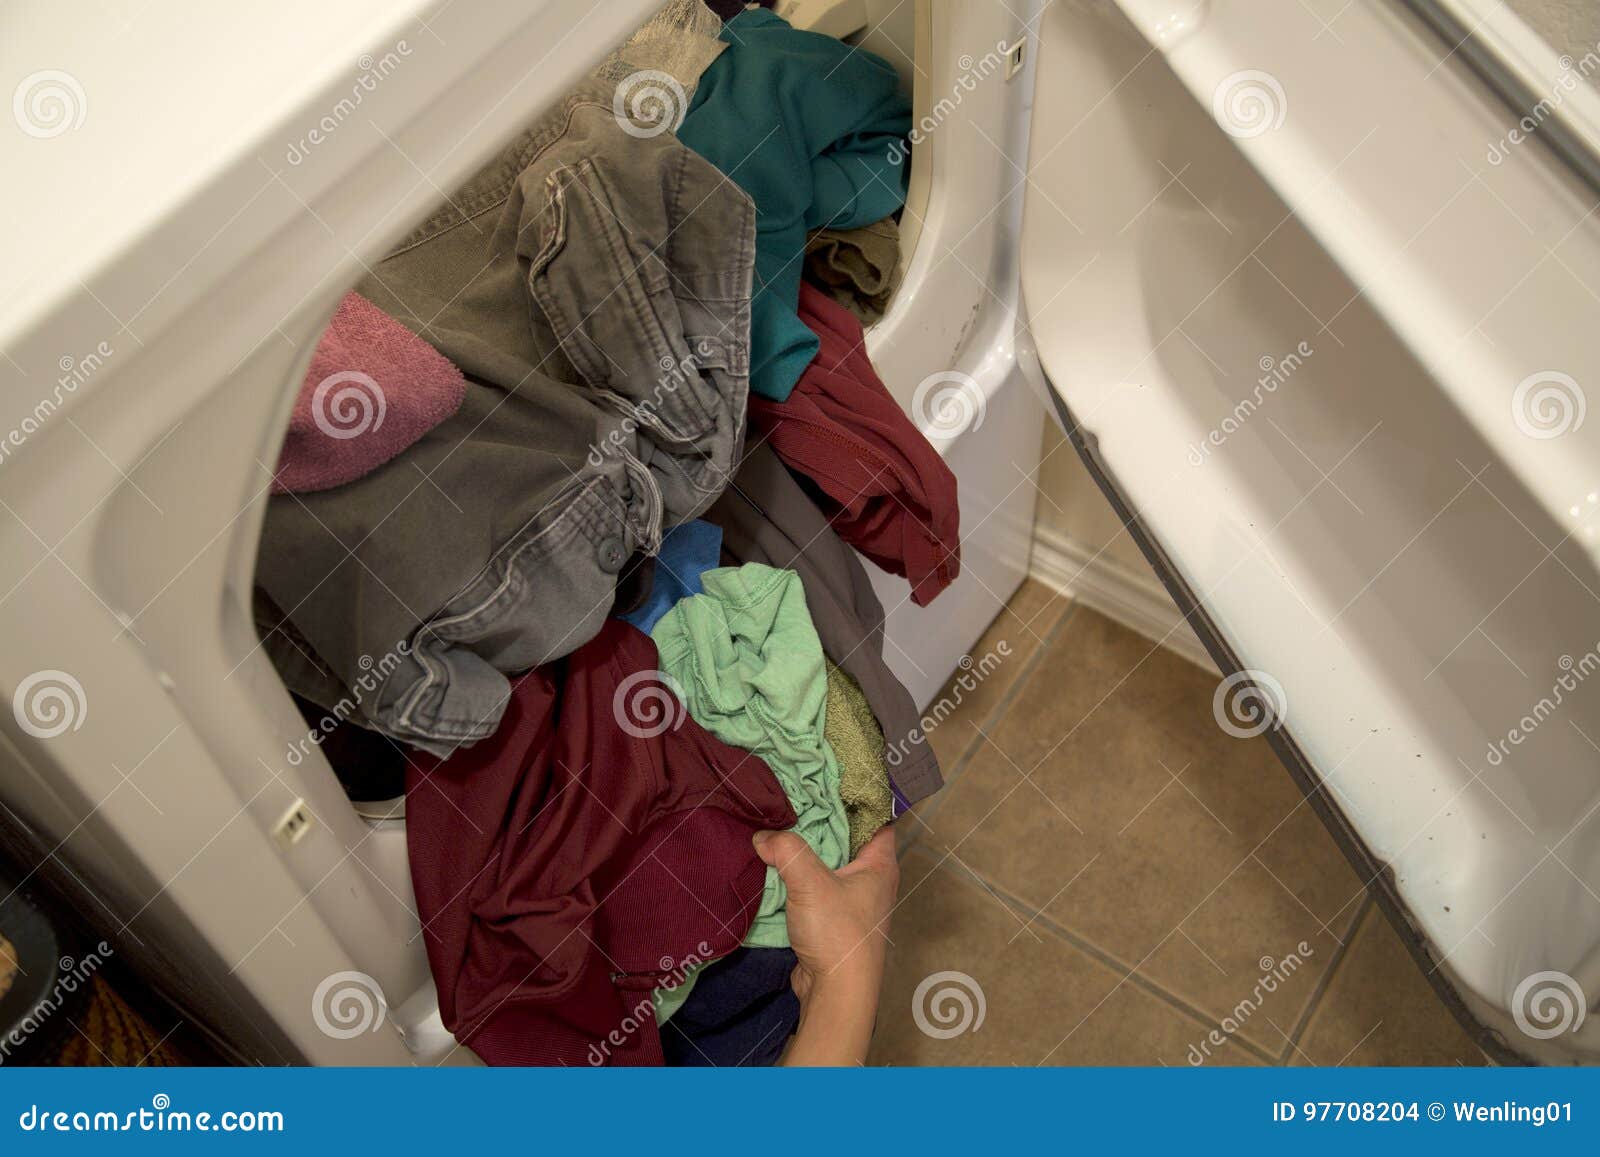 dried clothes in dryer of house